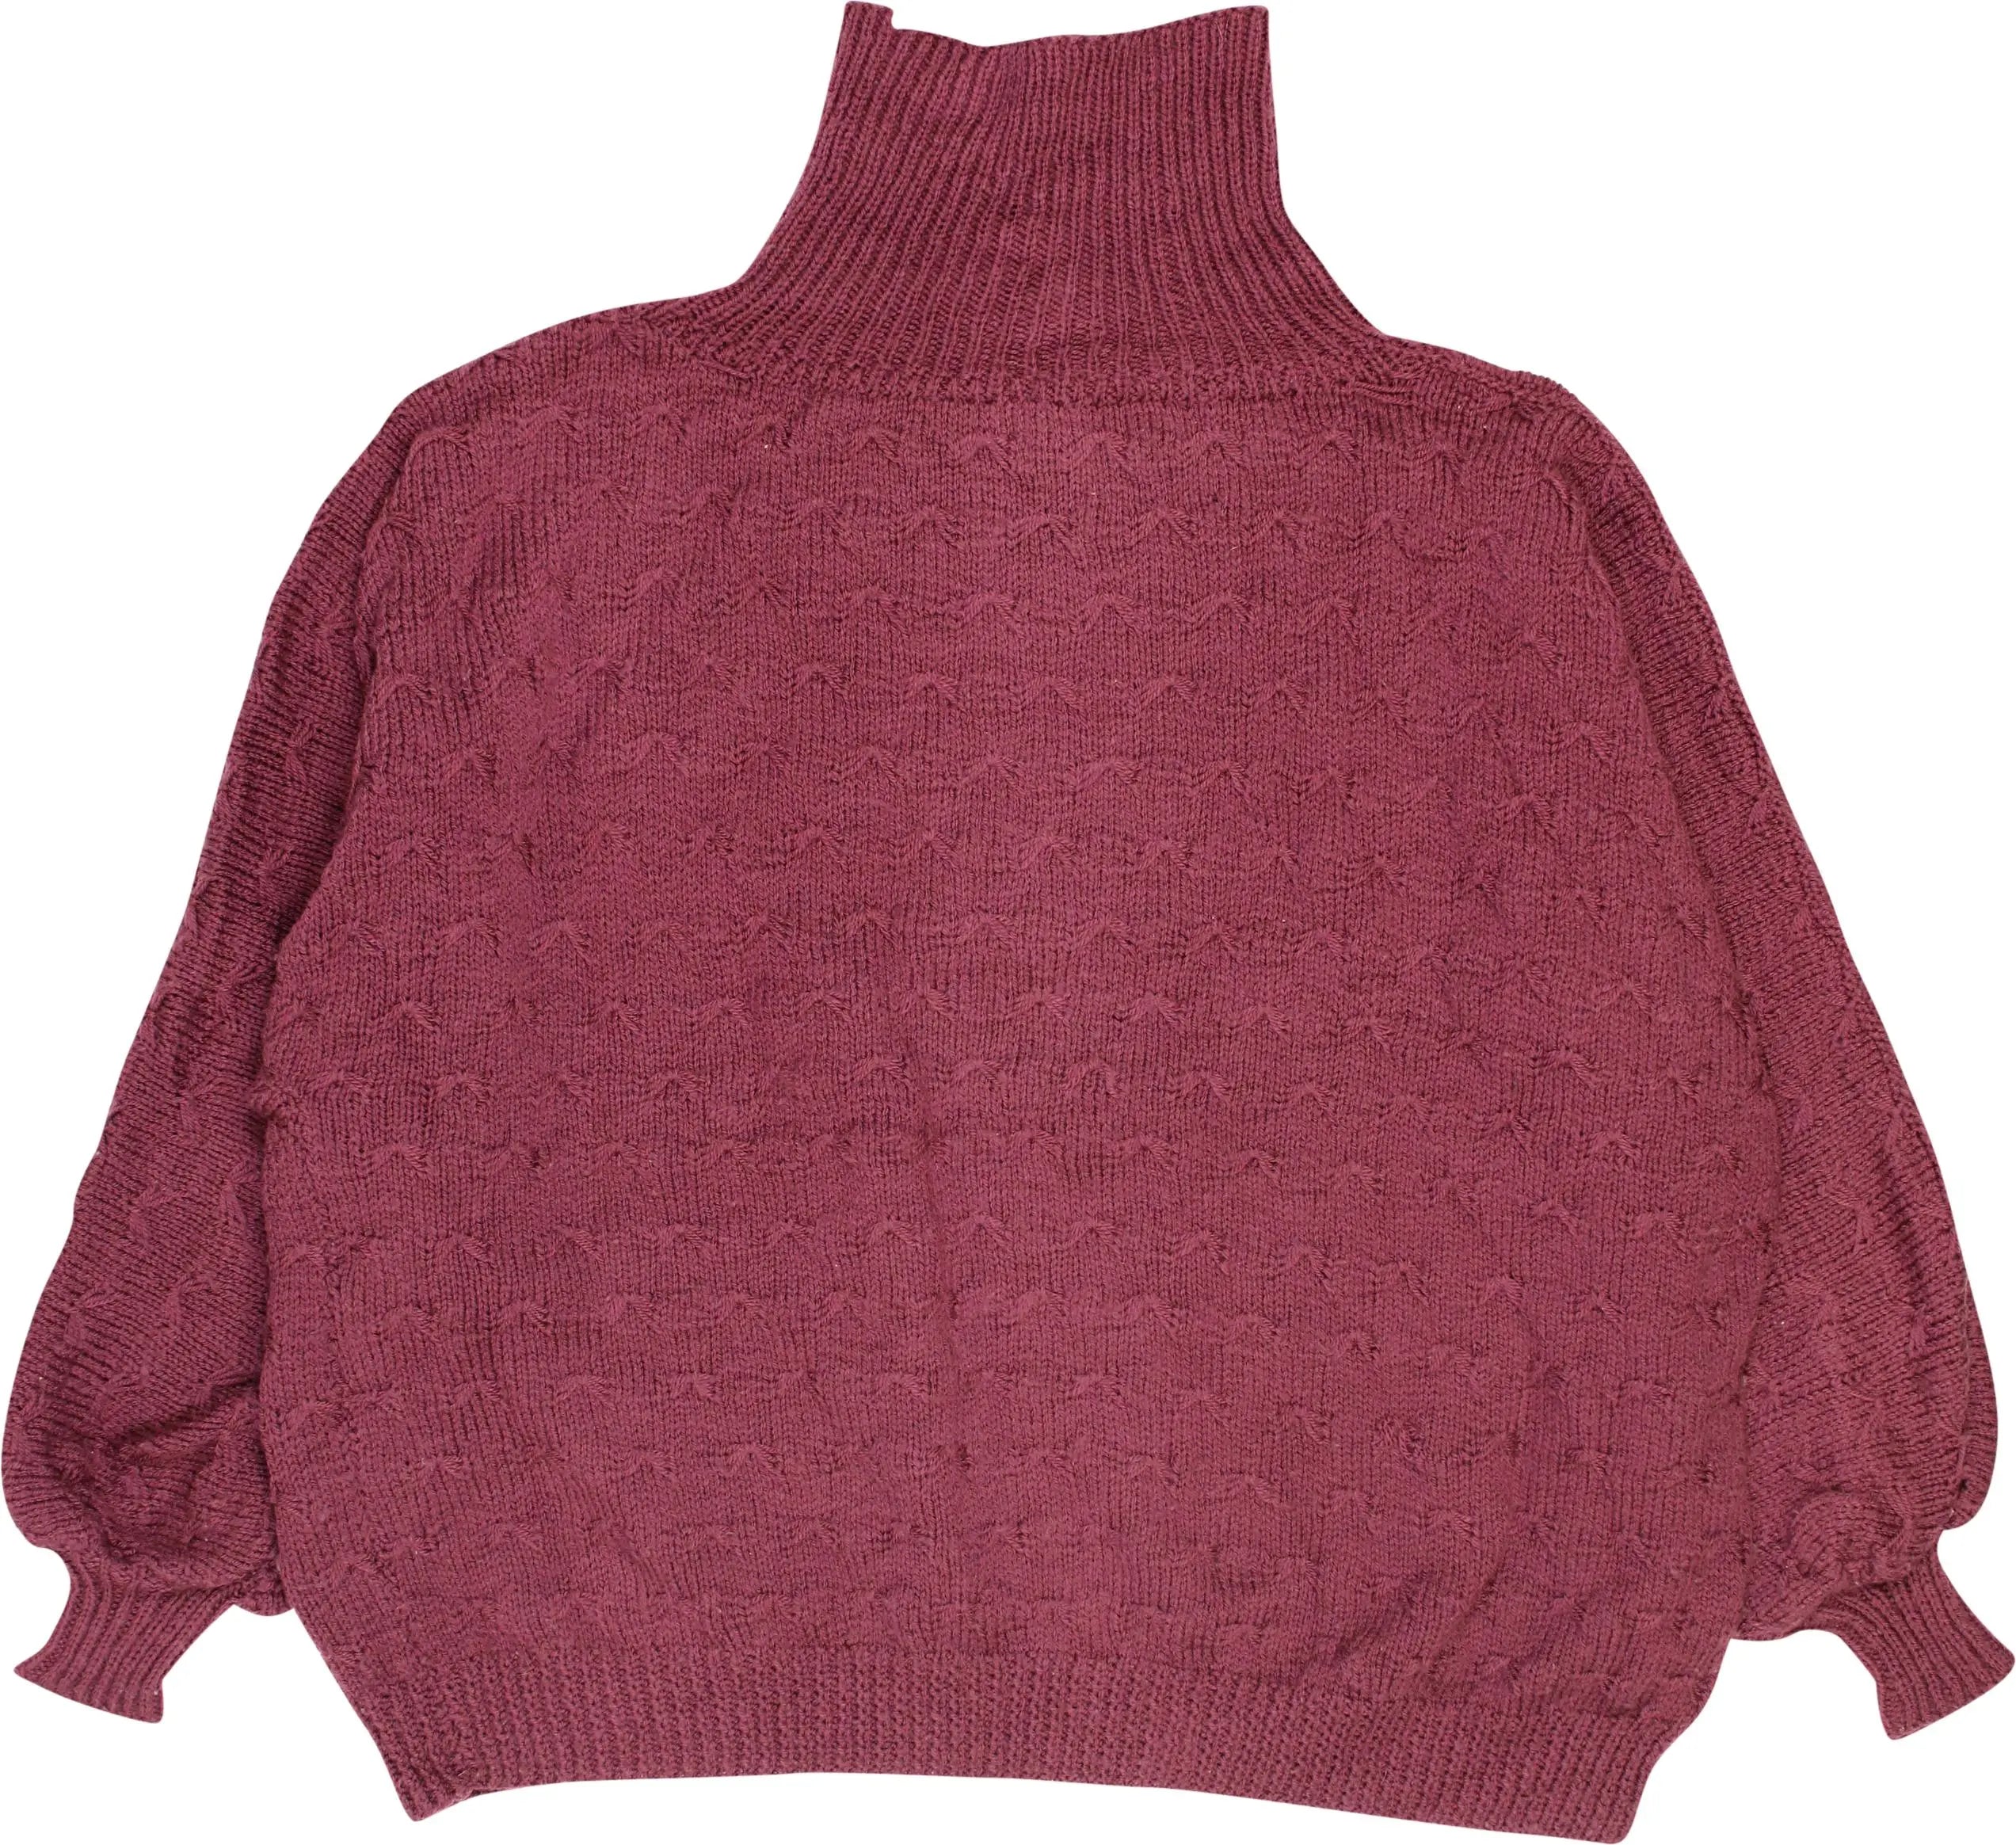 Unknown - Purple Knitted Jumper- ThriftTale.com - Vintage and second handclothing